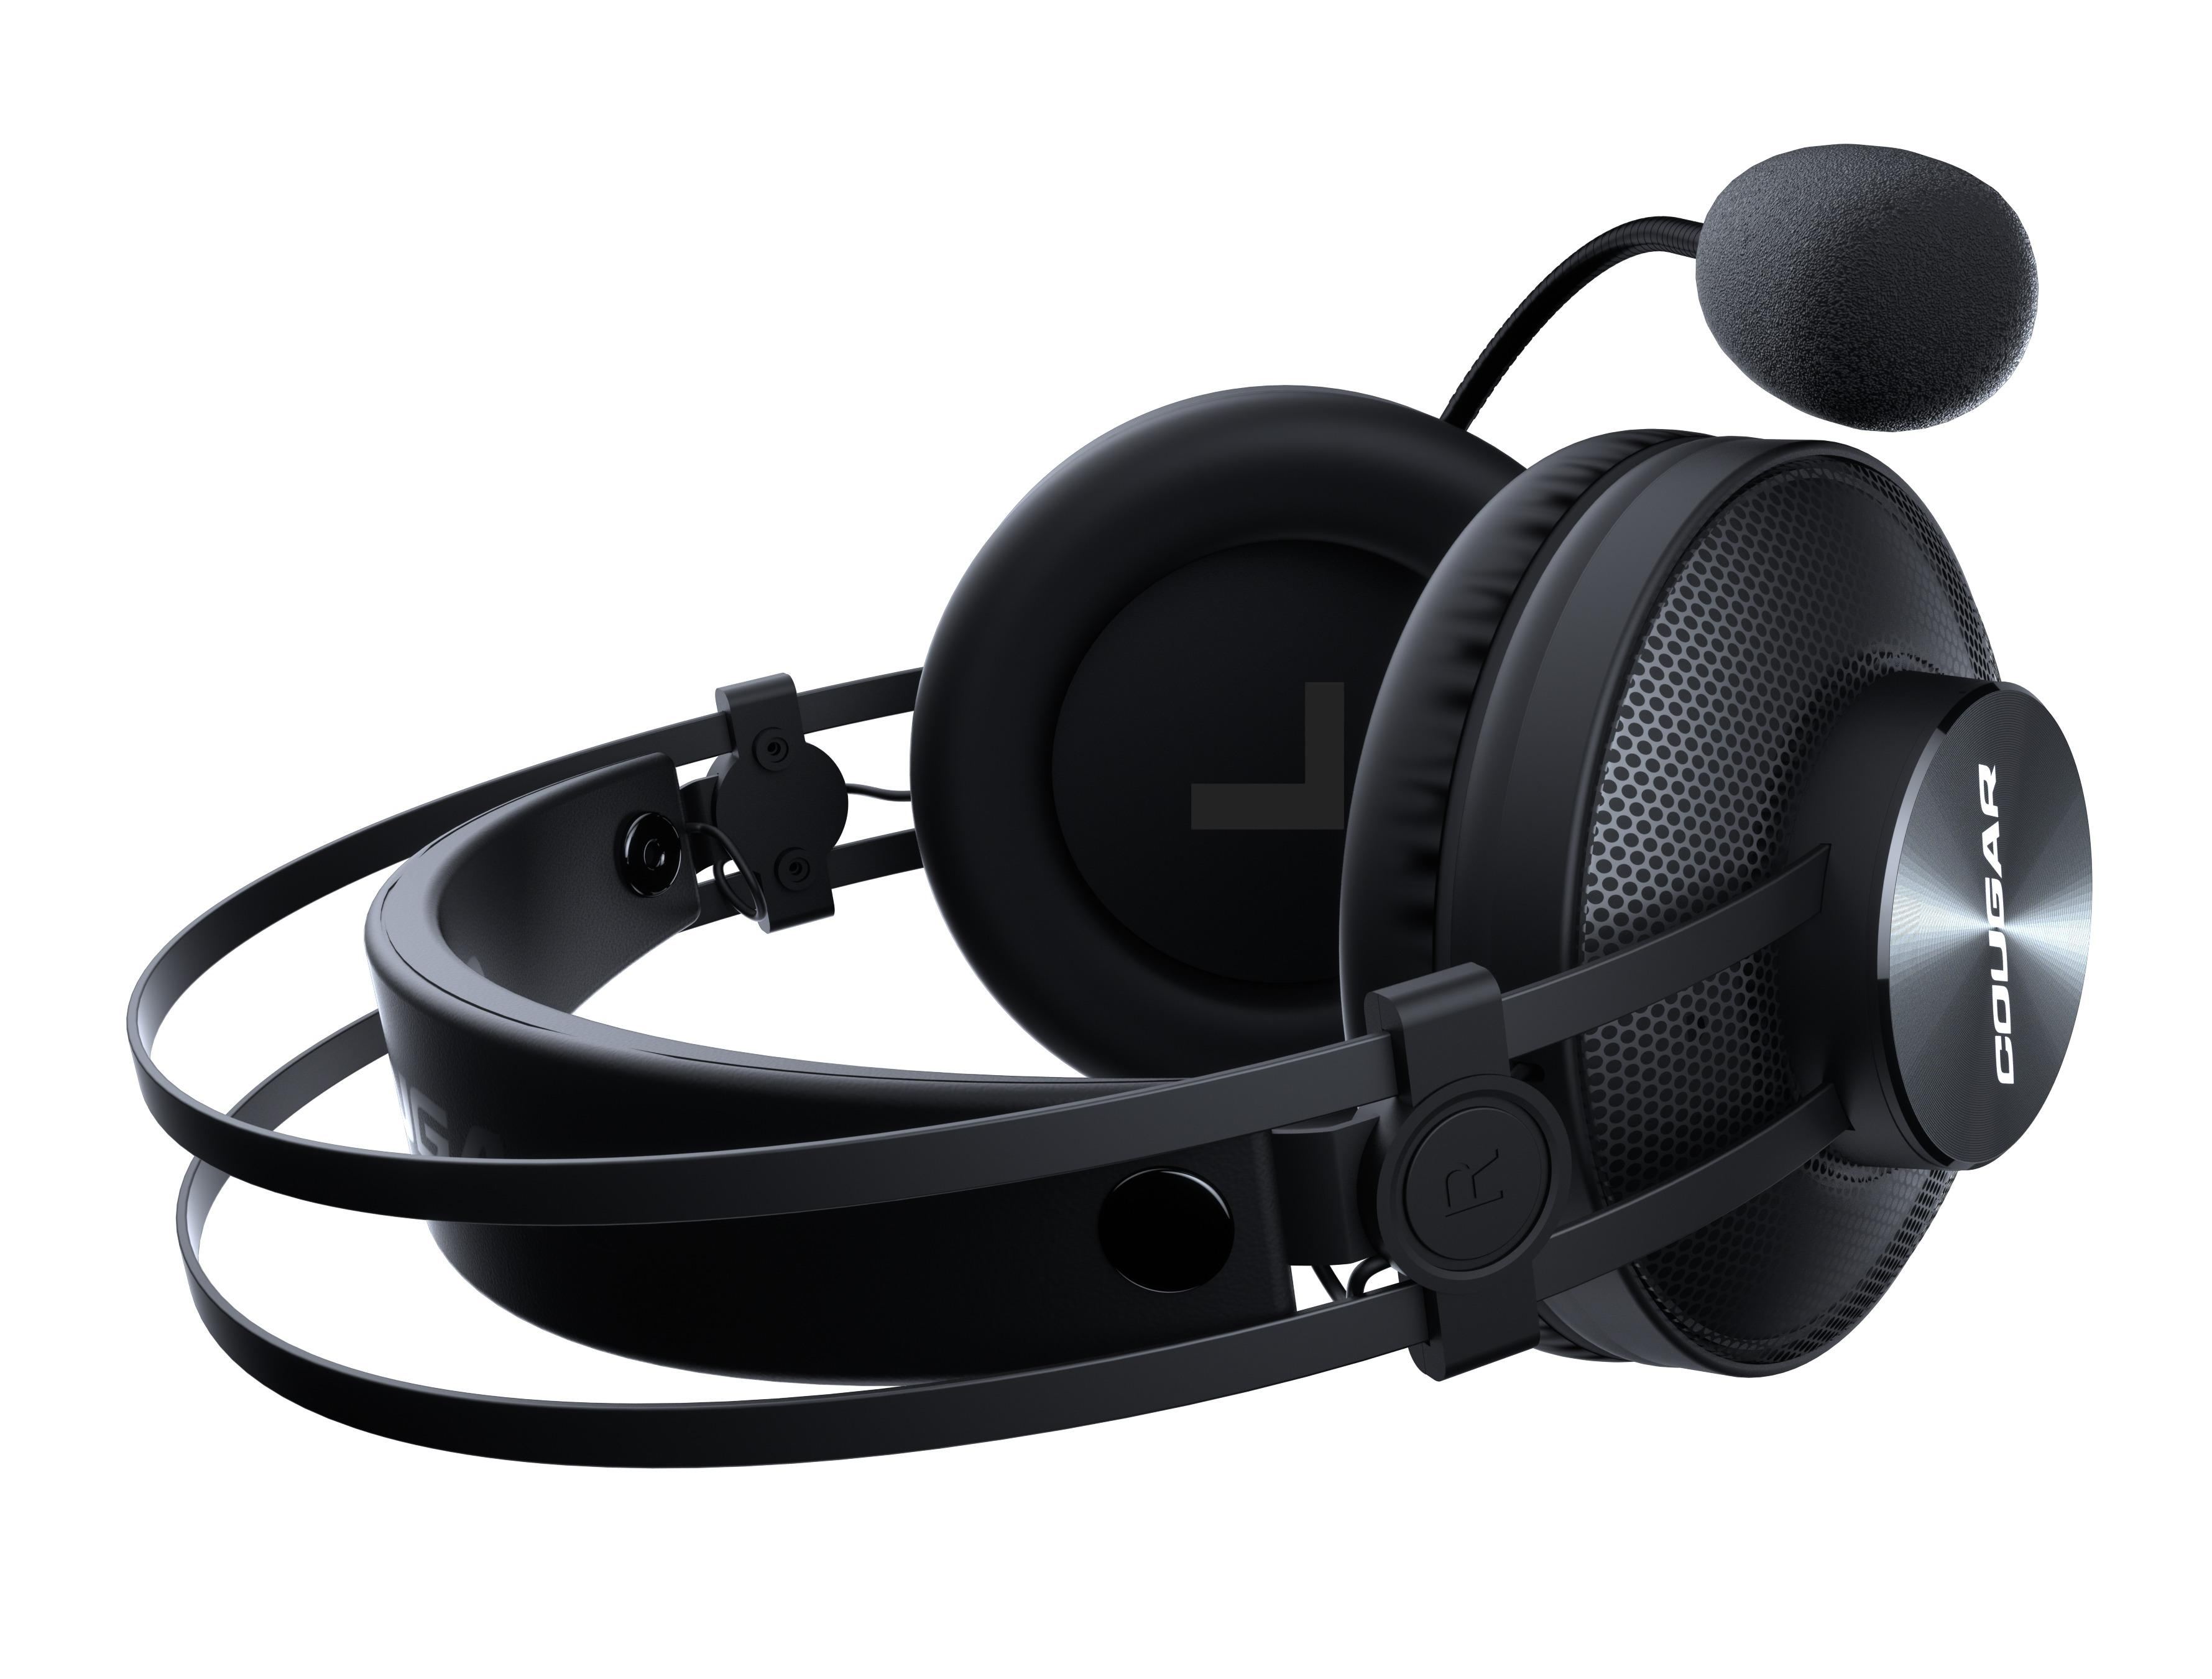 Schwarz Immersa COUGAR Gaming Essential, Headset Over-ear